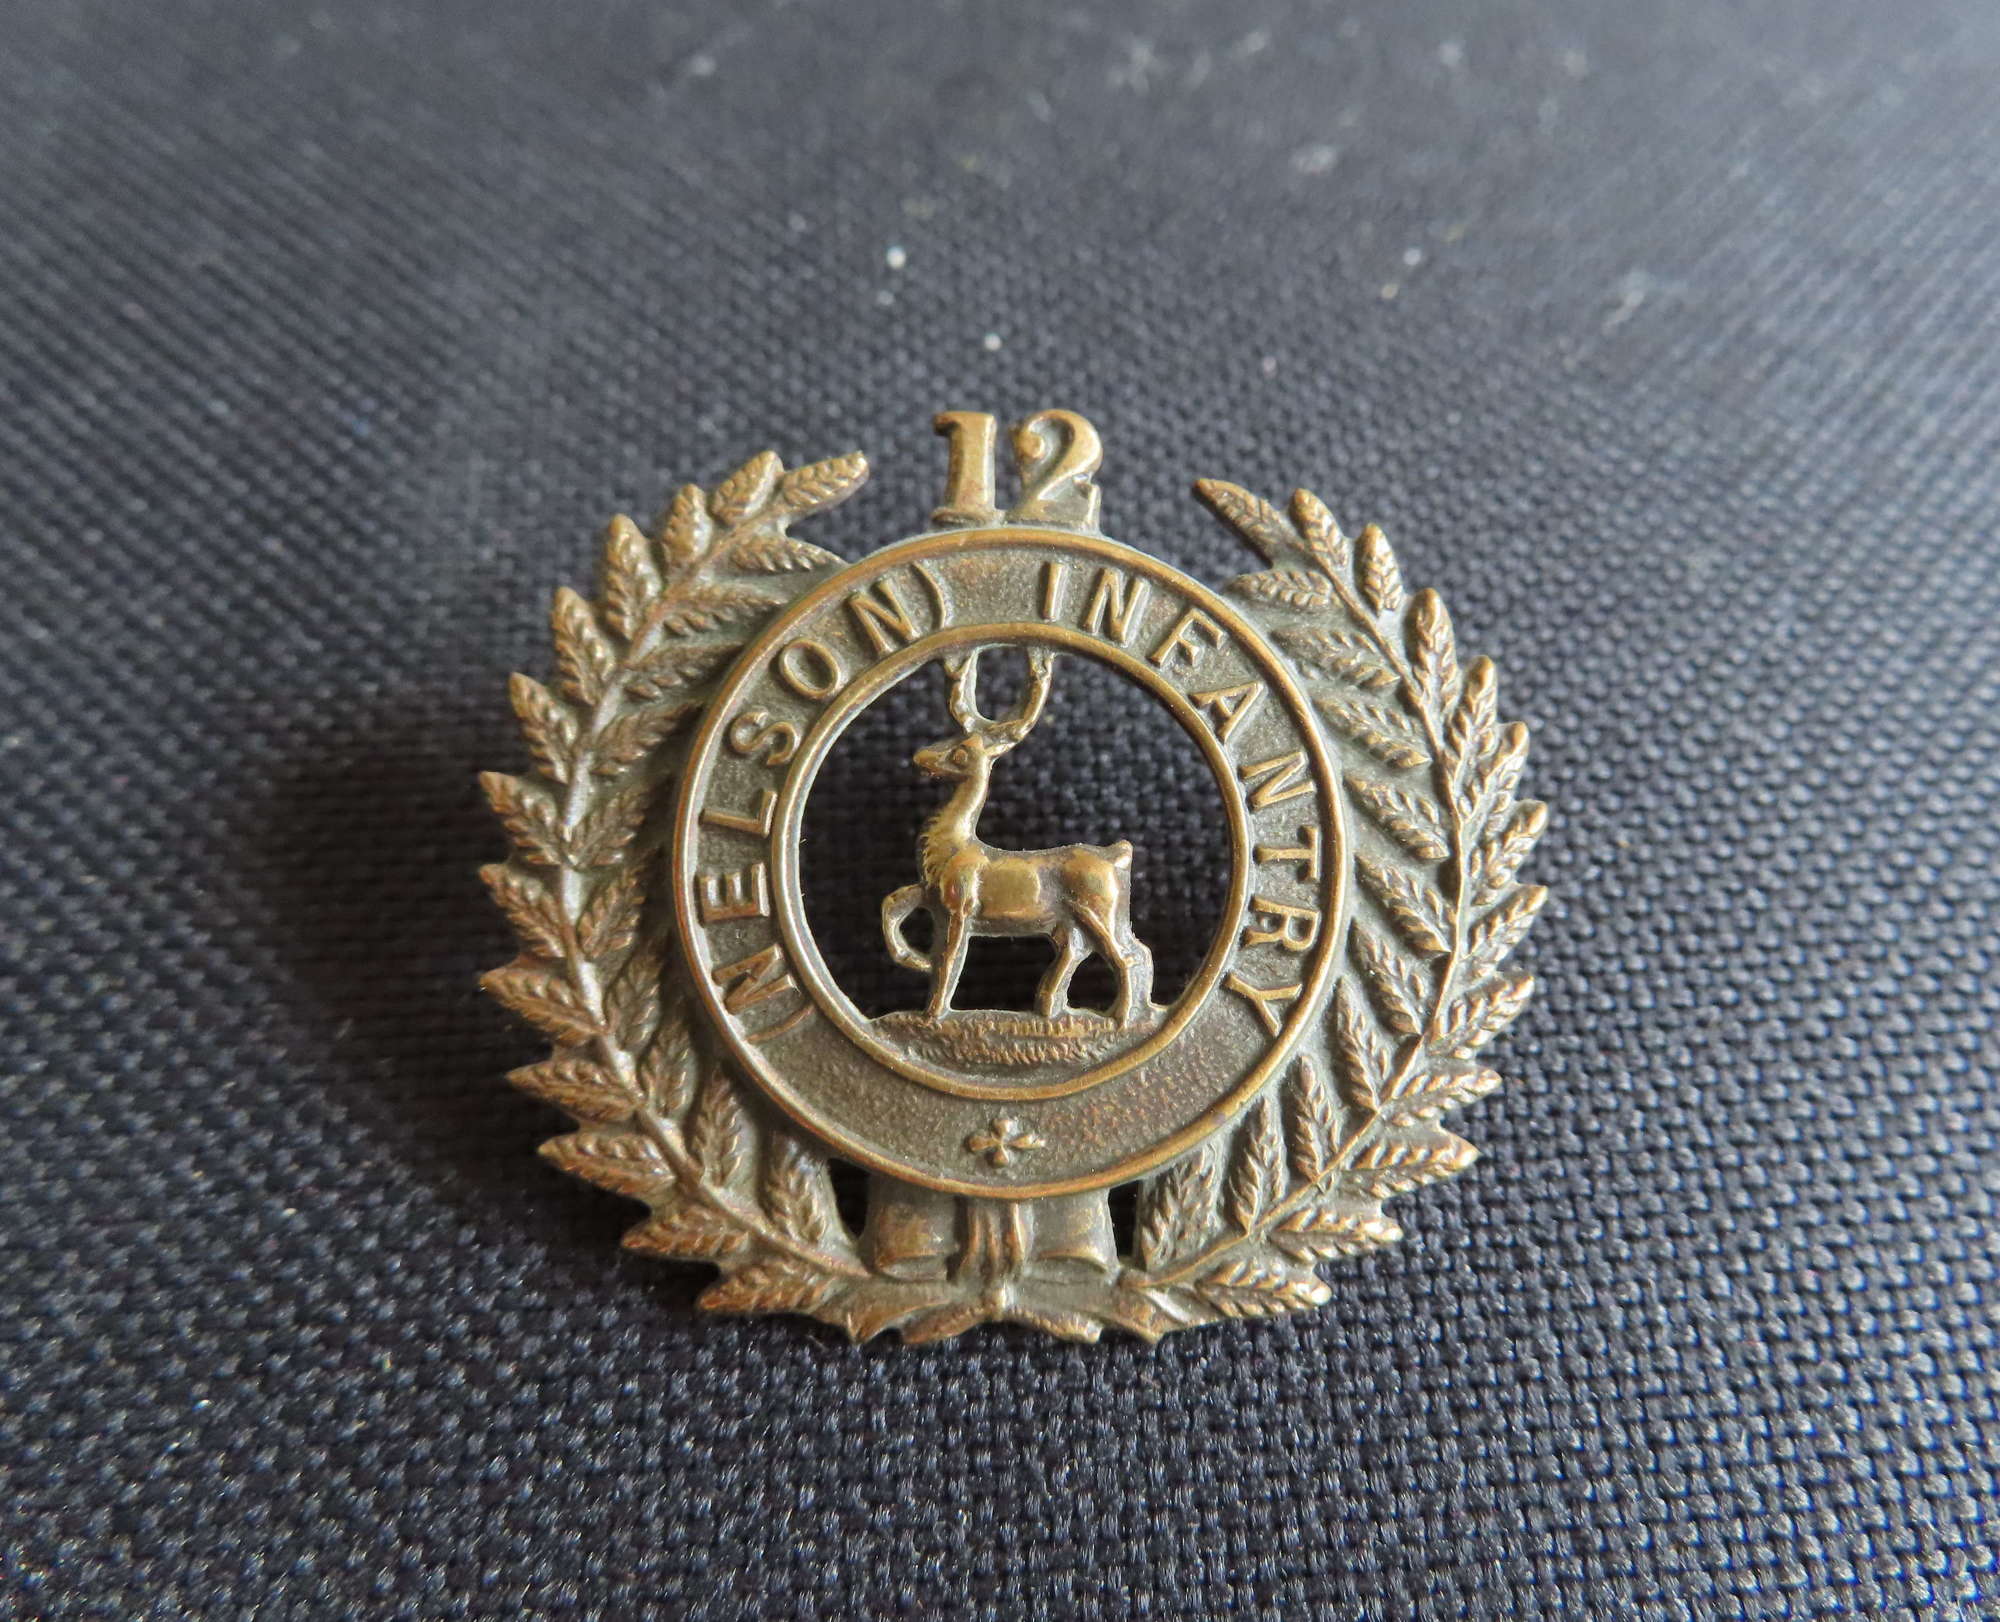 The 12th Nelson Regiment of New Zealand Cap Badge